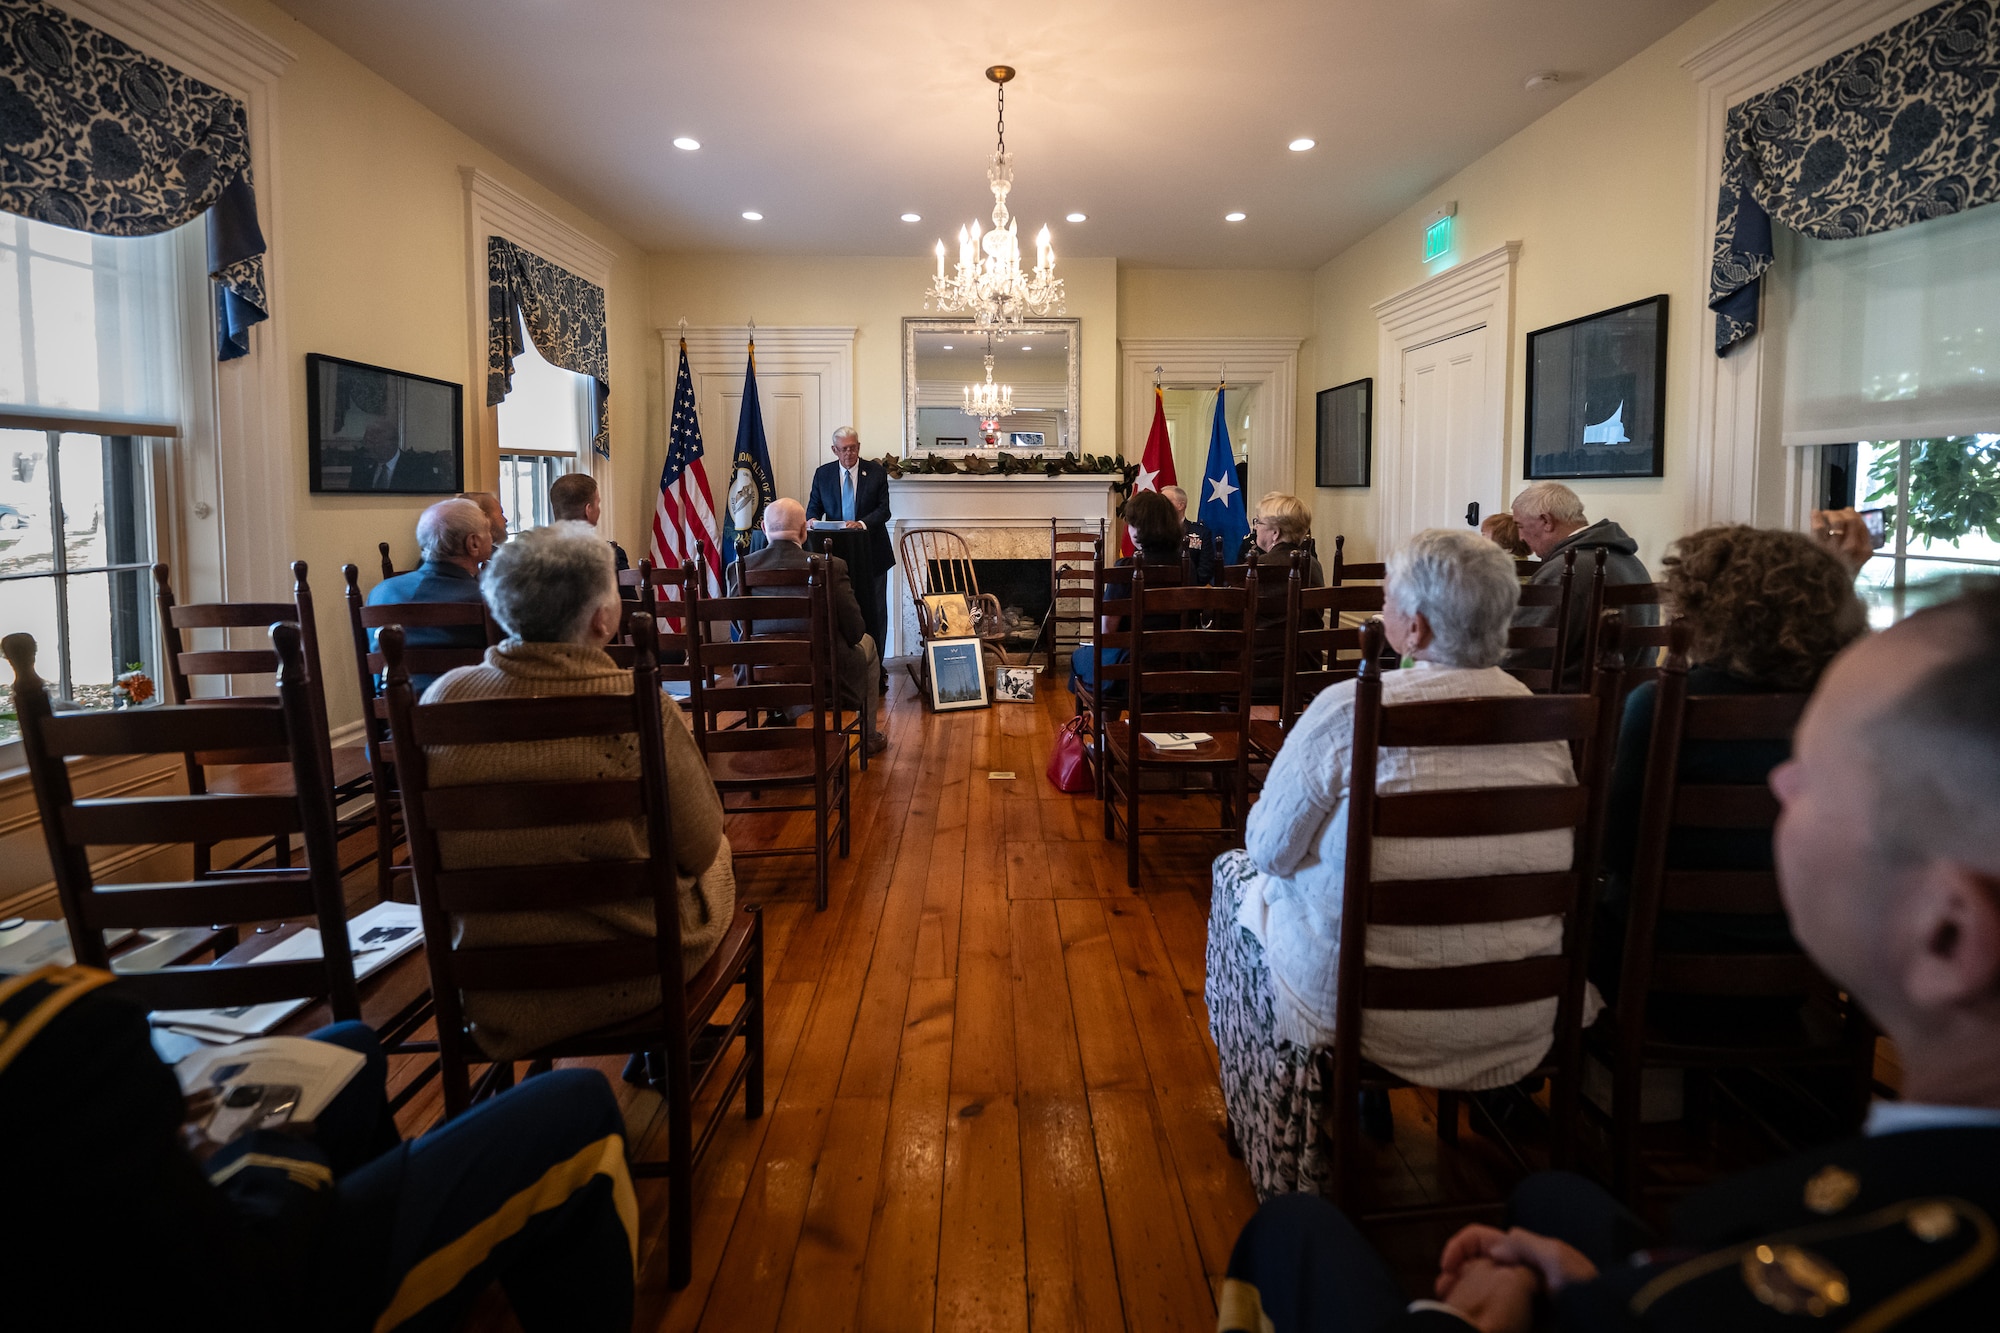 The family of U.S. Air Force Brig. Gen. Jack Henry Owen gather at Owen’s former home in Cynthiana, Ky., Nov. 13, 2023, for a ceremony to receive a posthumous Prisoner of War Medal on his behalf. Owen, who served in the Kentucky Air National Guard for more than 24 years, rising to become assistant adjutant general for Air, was piloting a B-17 Flying Fortress over Hamburg, Germany, on July 25, 1943, when the aircraft was shot down. He and his crewmen safely parachuted to the ground but were captured by German forces, and Owen remained a POW for the duration of World War II. (U.S. Air National Guard photo by Dale Greer)